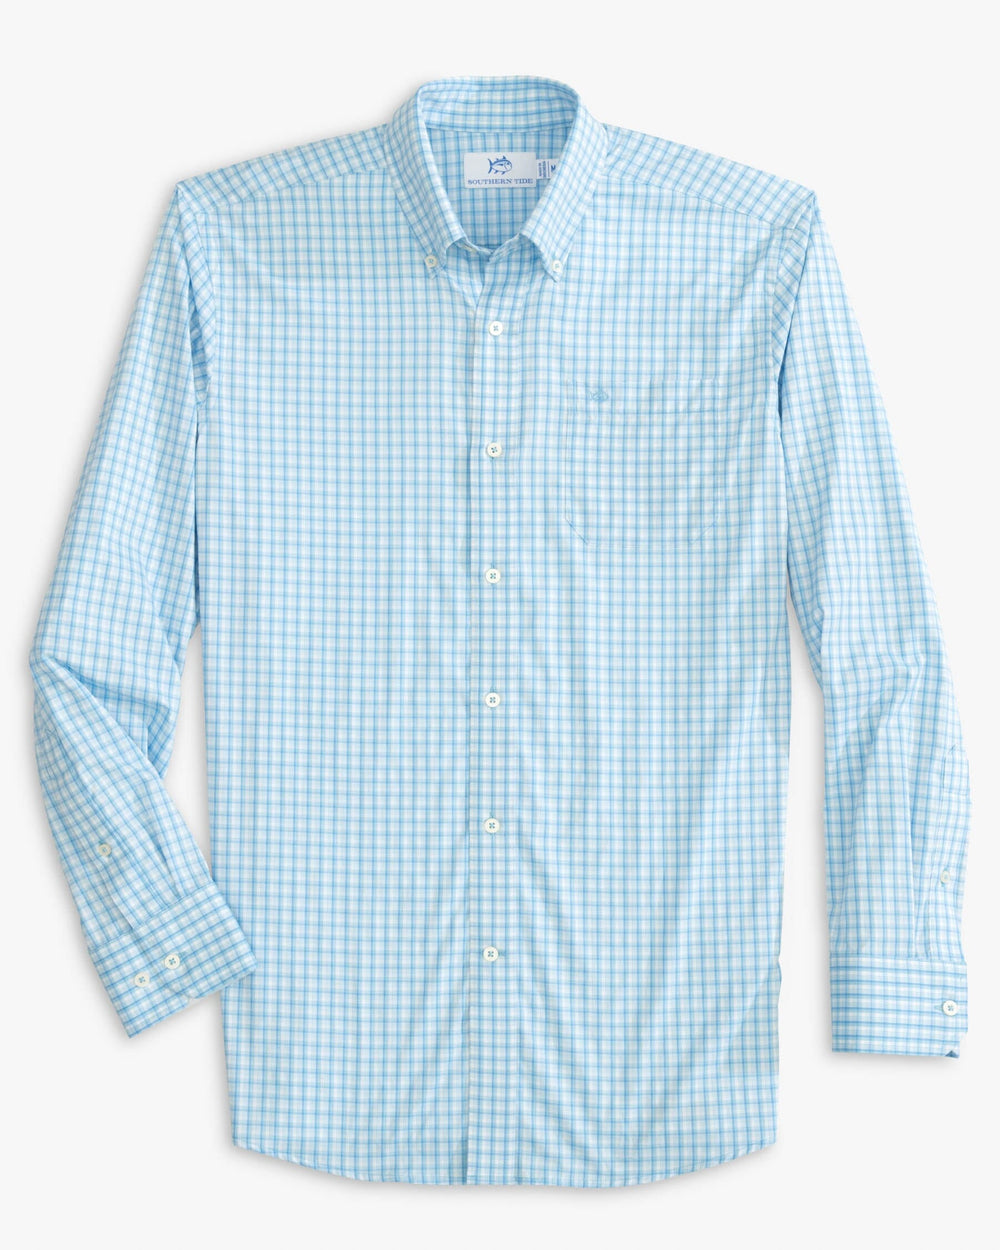 The front view of the Southern Tide brrr Skycrest Plaid Intercoastal Sport Shirt by Southern Tide - Rain Water